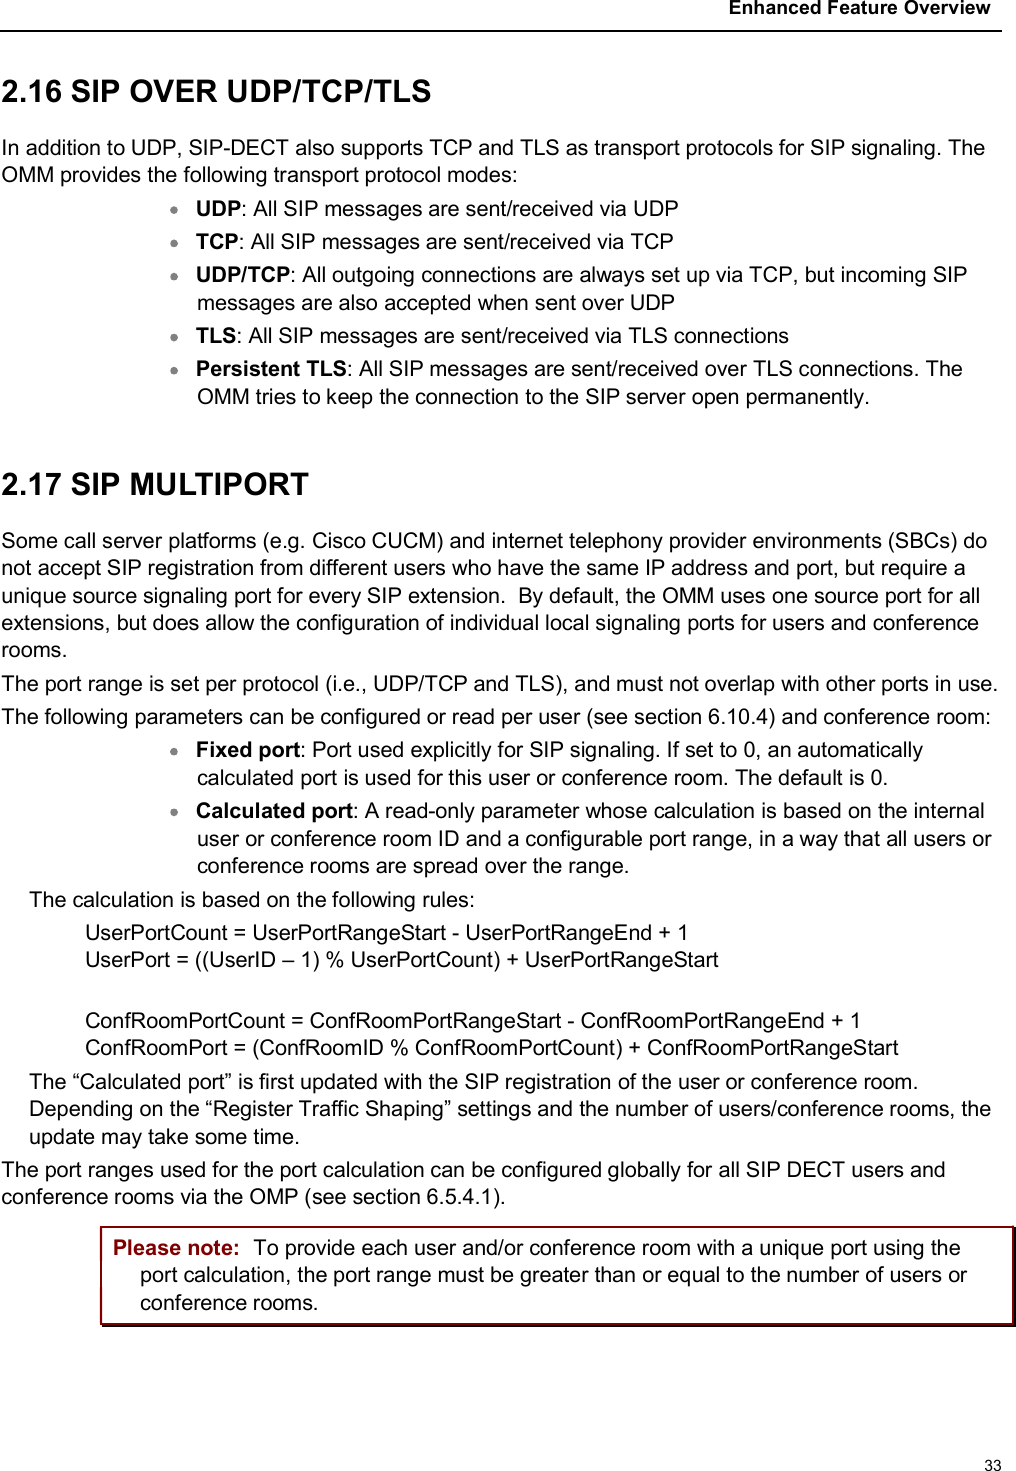 Enhanced Feature Overview332.16 SIP OVER UDP/TCP/TLSIn addition to UDP, SIP-DECT also supports TCP and TLS as transport protocols for SIP signaling. The OMM provides the following transport protocol modes:UDP: All SIP messages are sent/received via UDPTCP: All SIP messages are sent/received via TCPUDP/TCP: All outgoing connections are always set up via TCP, but incoming SIP messages are also accepted when sent over UDPTLS: All SIP messages are sent/received via TLS connectionsPersistent TLS: All SIP messages are sent/received over TLS connections. The OMM tries to keep the connection to the SIP server open permanently.2.17 SIP MULTIPORT Some call server platforms (e.g. Cisco CUCM) and internet telephony provider environments (SBCs) do not accept SIP registration from different users who have the same IP address and port, but require a unique source signaling port for every SIP extension.  By default, the OMM uses one source port for all extensions, but does allow the configuration of individual local signaling ports for users and conference rooms.The port range is set per protocol (i.e., UDP/TCP and TLS), and must not overlap with other ports in use.The following parameters can be configured or read per user (see section 6.10.4) and conference room:Fixed port: Port used explicitly for SIP signaling. If set to 0, an automatically calculated port is used for this user or conference room. The default is 0.Calculated port: A read-only parameter whose calculation is based on the internal user or conference room ID and a configurable port range, in a way that all users or conference rooms are spread over the range.The calculation is based on the following rules: UserPortCount = UserPortRangeStart - UserPortRangeEnd + 1 UserPort = ((UserID – 1) % UserPortCount) + UserPortRangeStart ConfRoomPortCount = ConfRoomPortRangeStart - ConfRoomPortRangeEnd + 1ConfRoomPort = (ConfRoomID % ConfRoomPortCount) + ConfRoomPortRangeStartThe “Calculated port” is first updated with the SIP registration of the user or conference room. Depending on the “Register Traffic Shaping” settings and the number of users/conference rooms, the update may take some time.The port ranges used for the port calculation can be configured globally for all SIP DECT users and conference rooms via the OMP (see section 6.5.4.1). Please note: To provide each user and/or conference room with a unique port using the port calculation, the port range must be greater than or equal to the number of users or conference rooms.